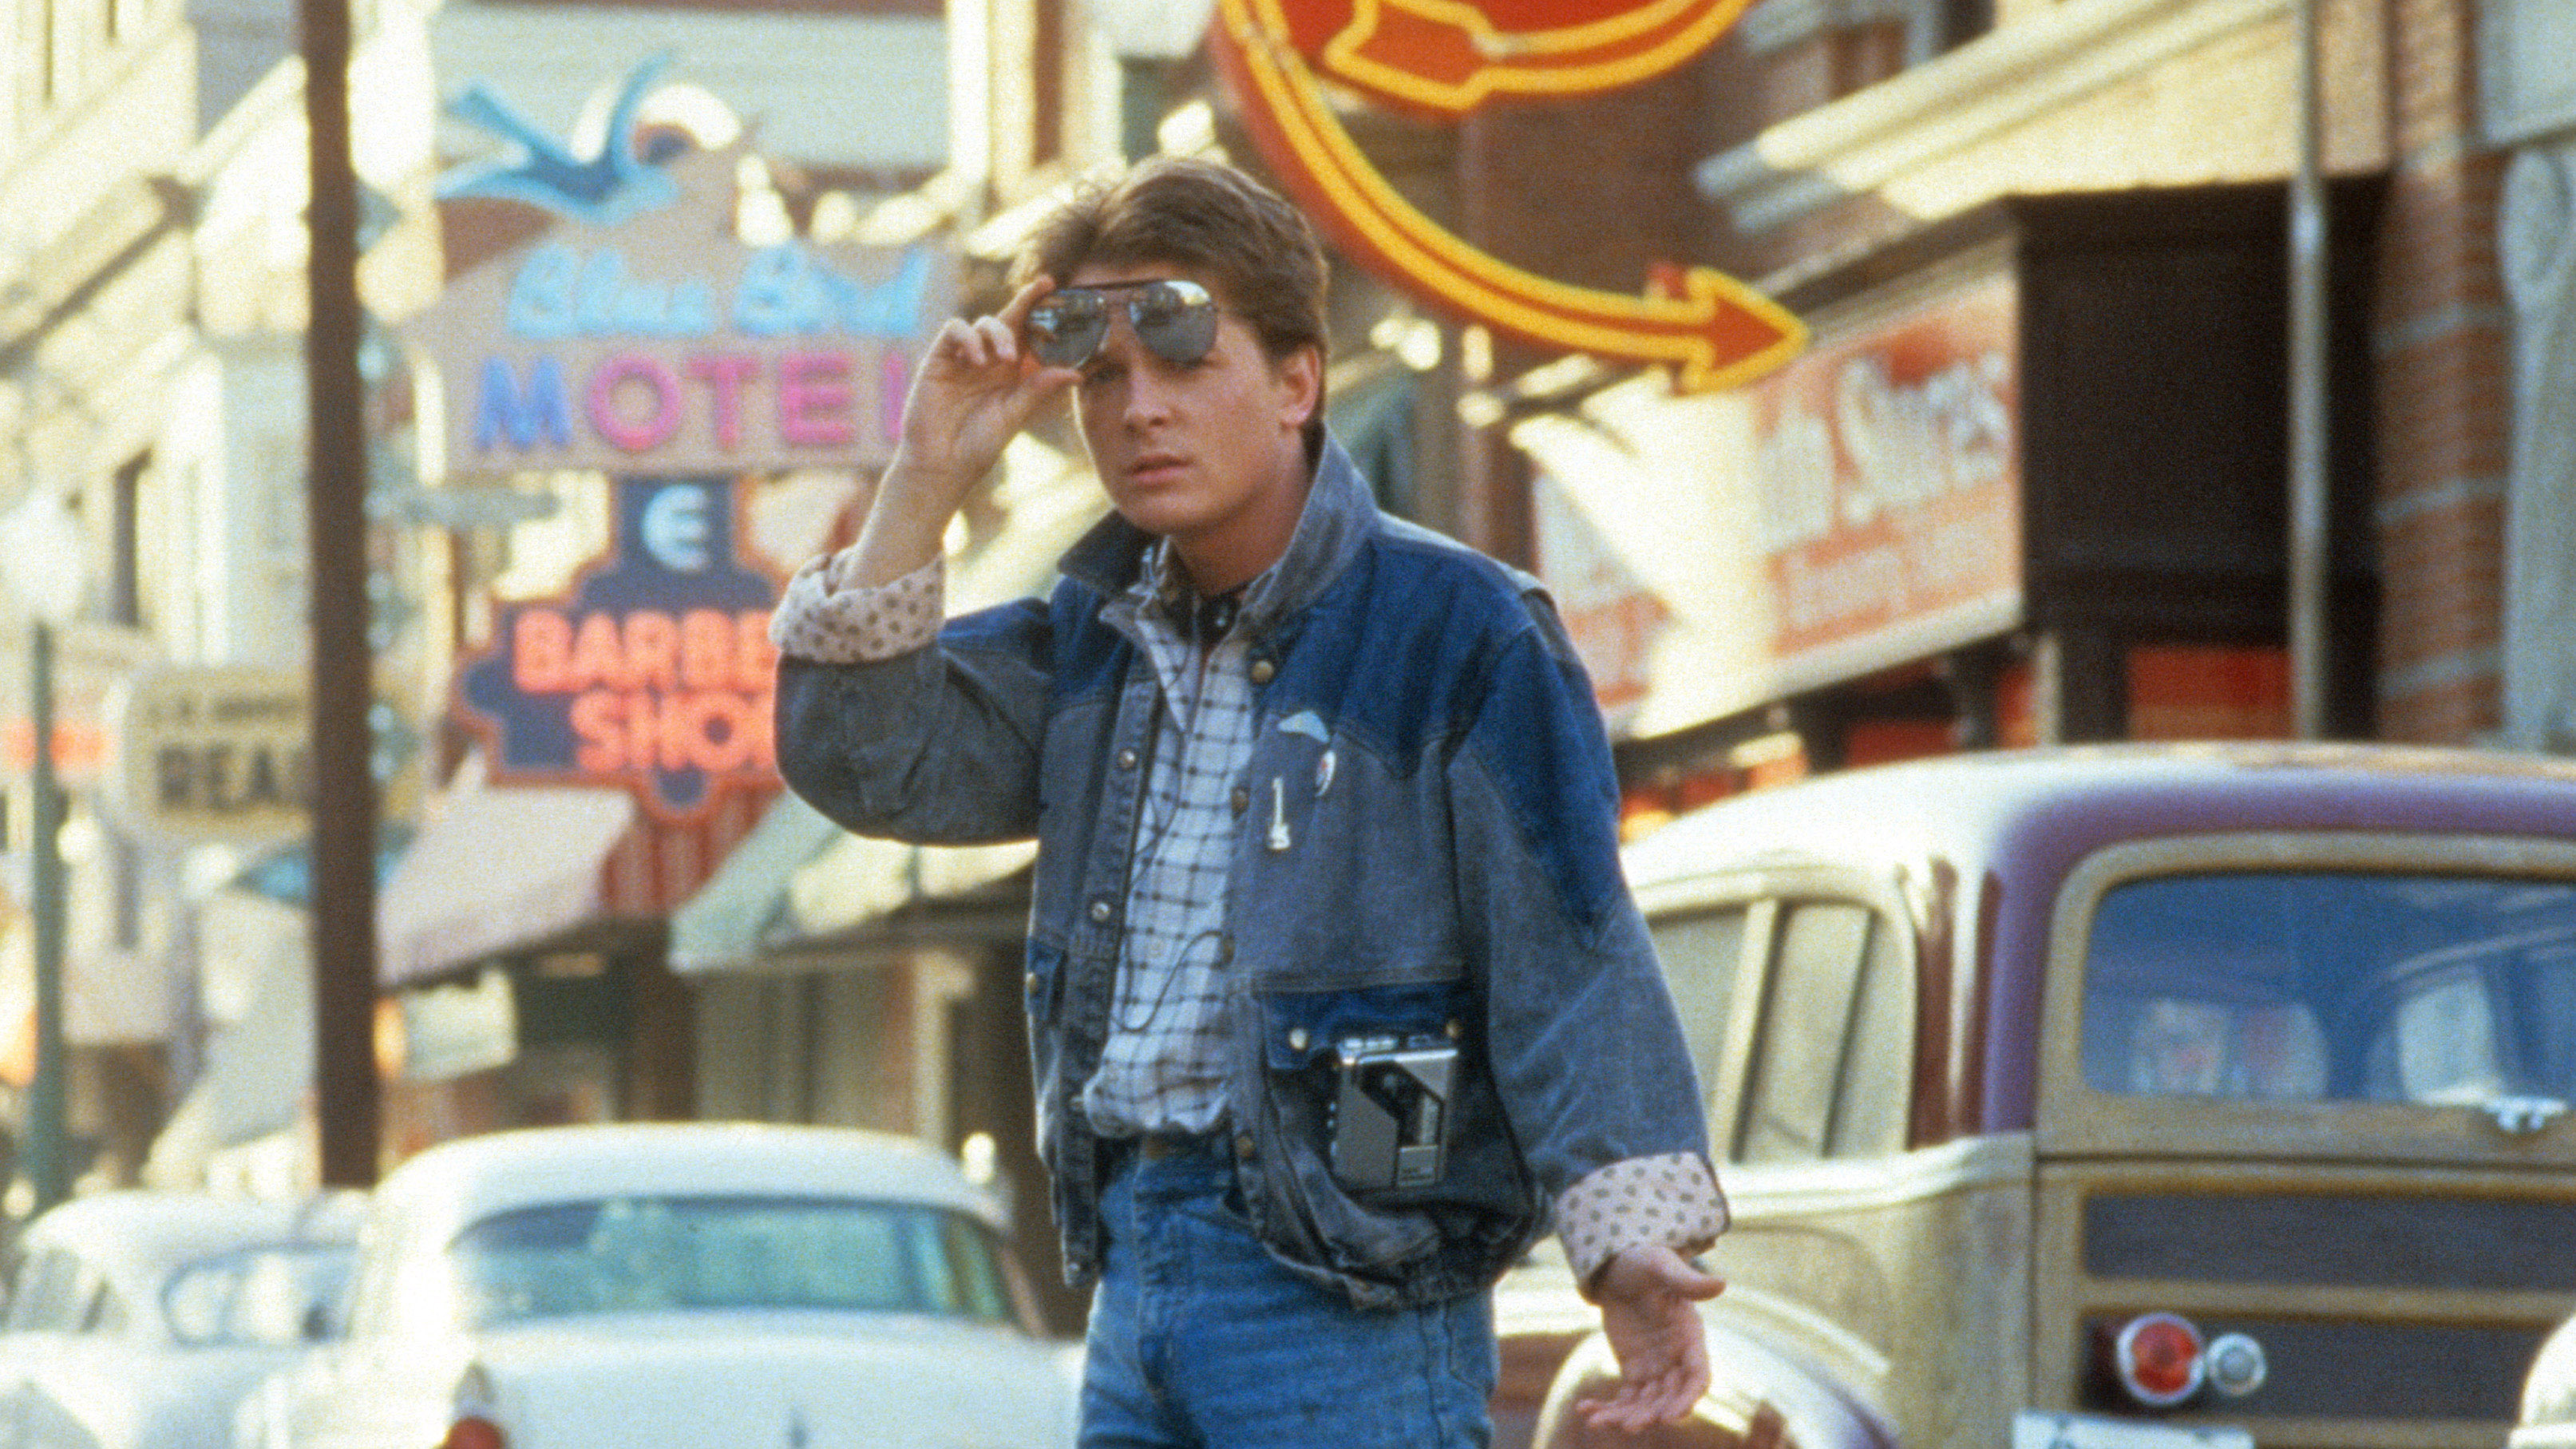 Michael J. Fox as Marty McFly crossing the street in a scene from Back to the Future, 1985.